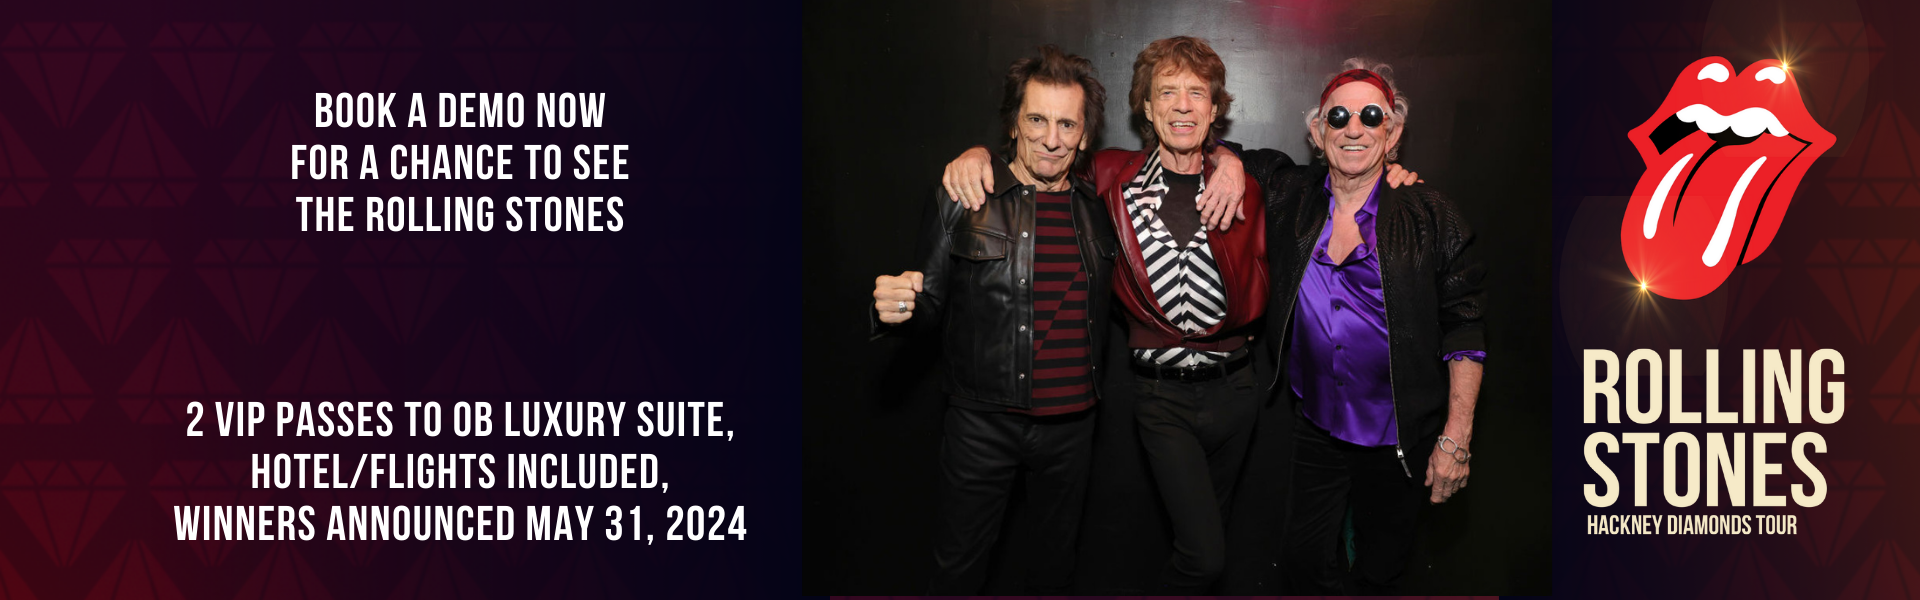 Rolling Stones banner 1920px X 600px (1) (1)